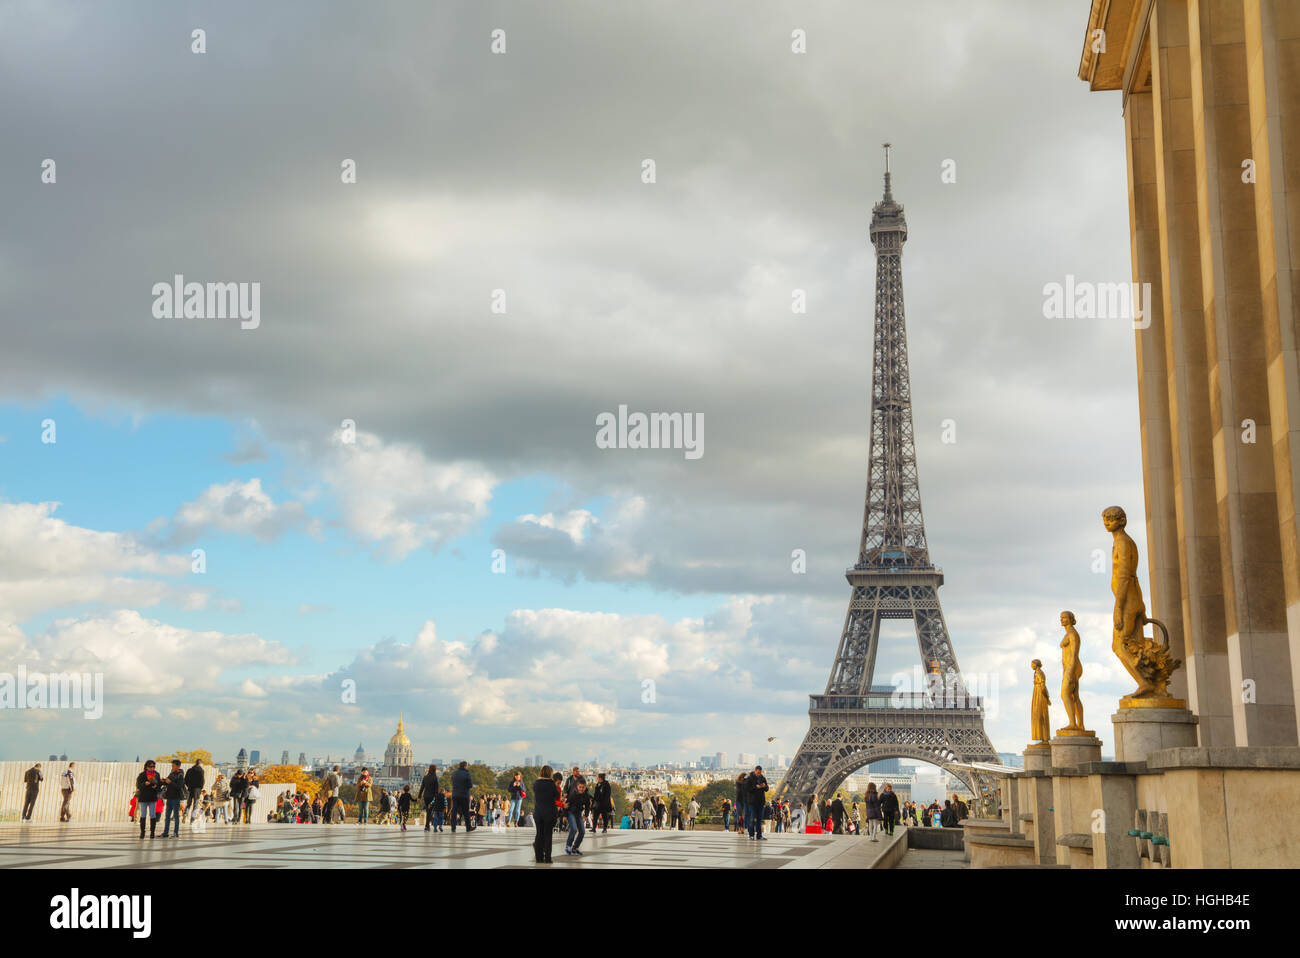 PARIS - NOVEMBER 2: Cityscape of Paris with the Eiffel tower on November 2, 2016 in Paris, France. Stock Photo